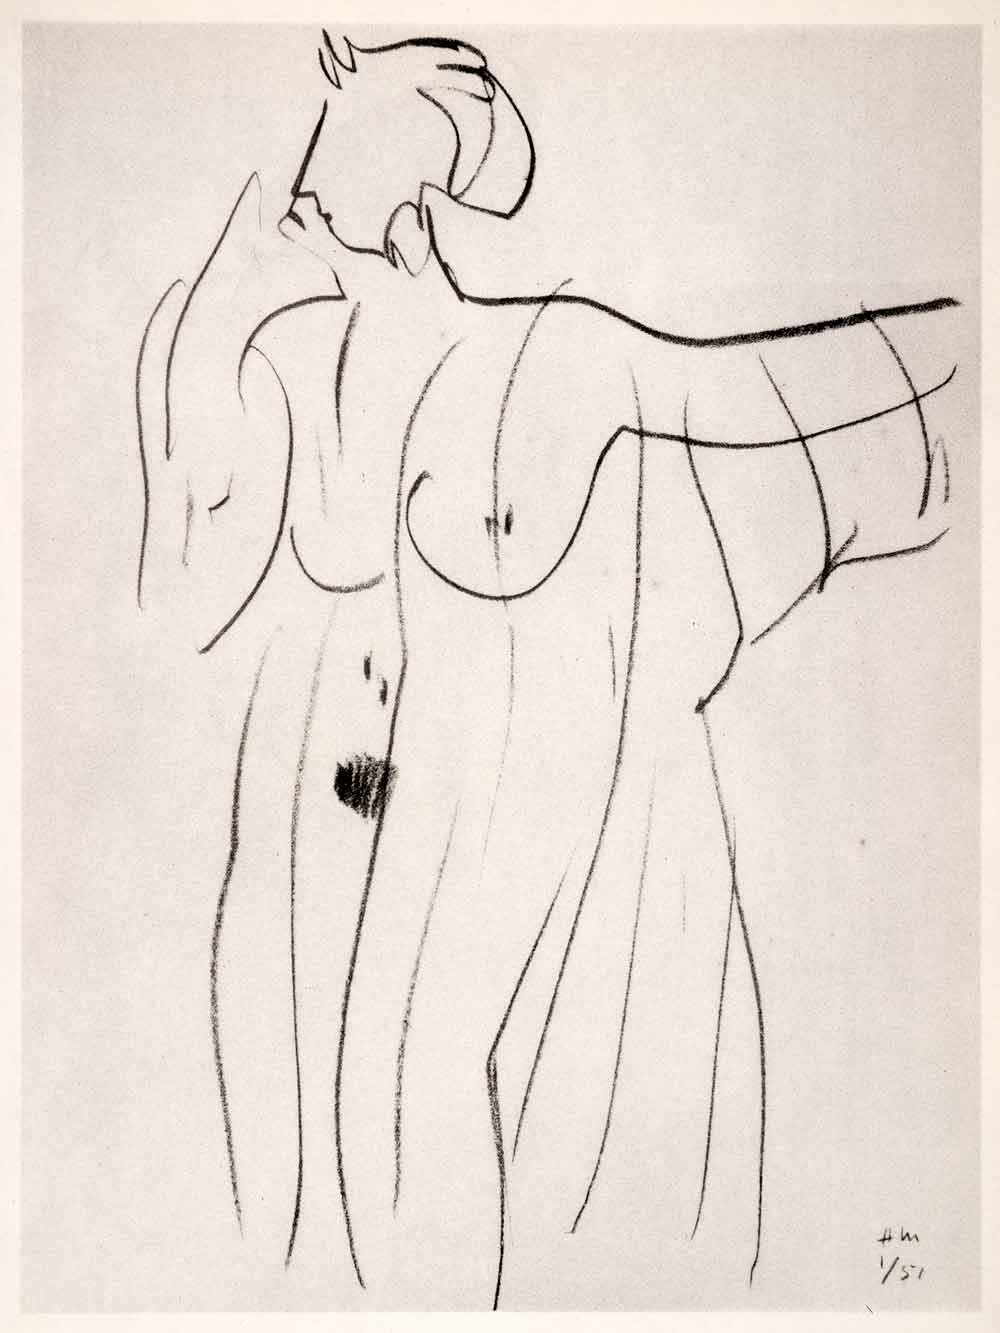 1969 Photolithograph Henri Matisse Nude Woman Sheer Nightdress Abstract Sketch